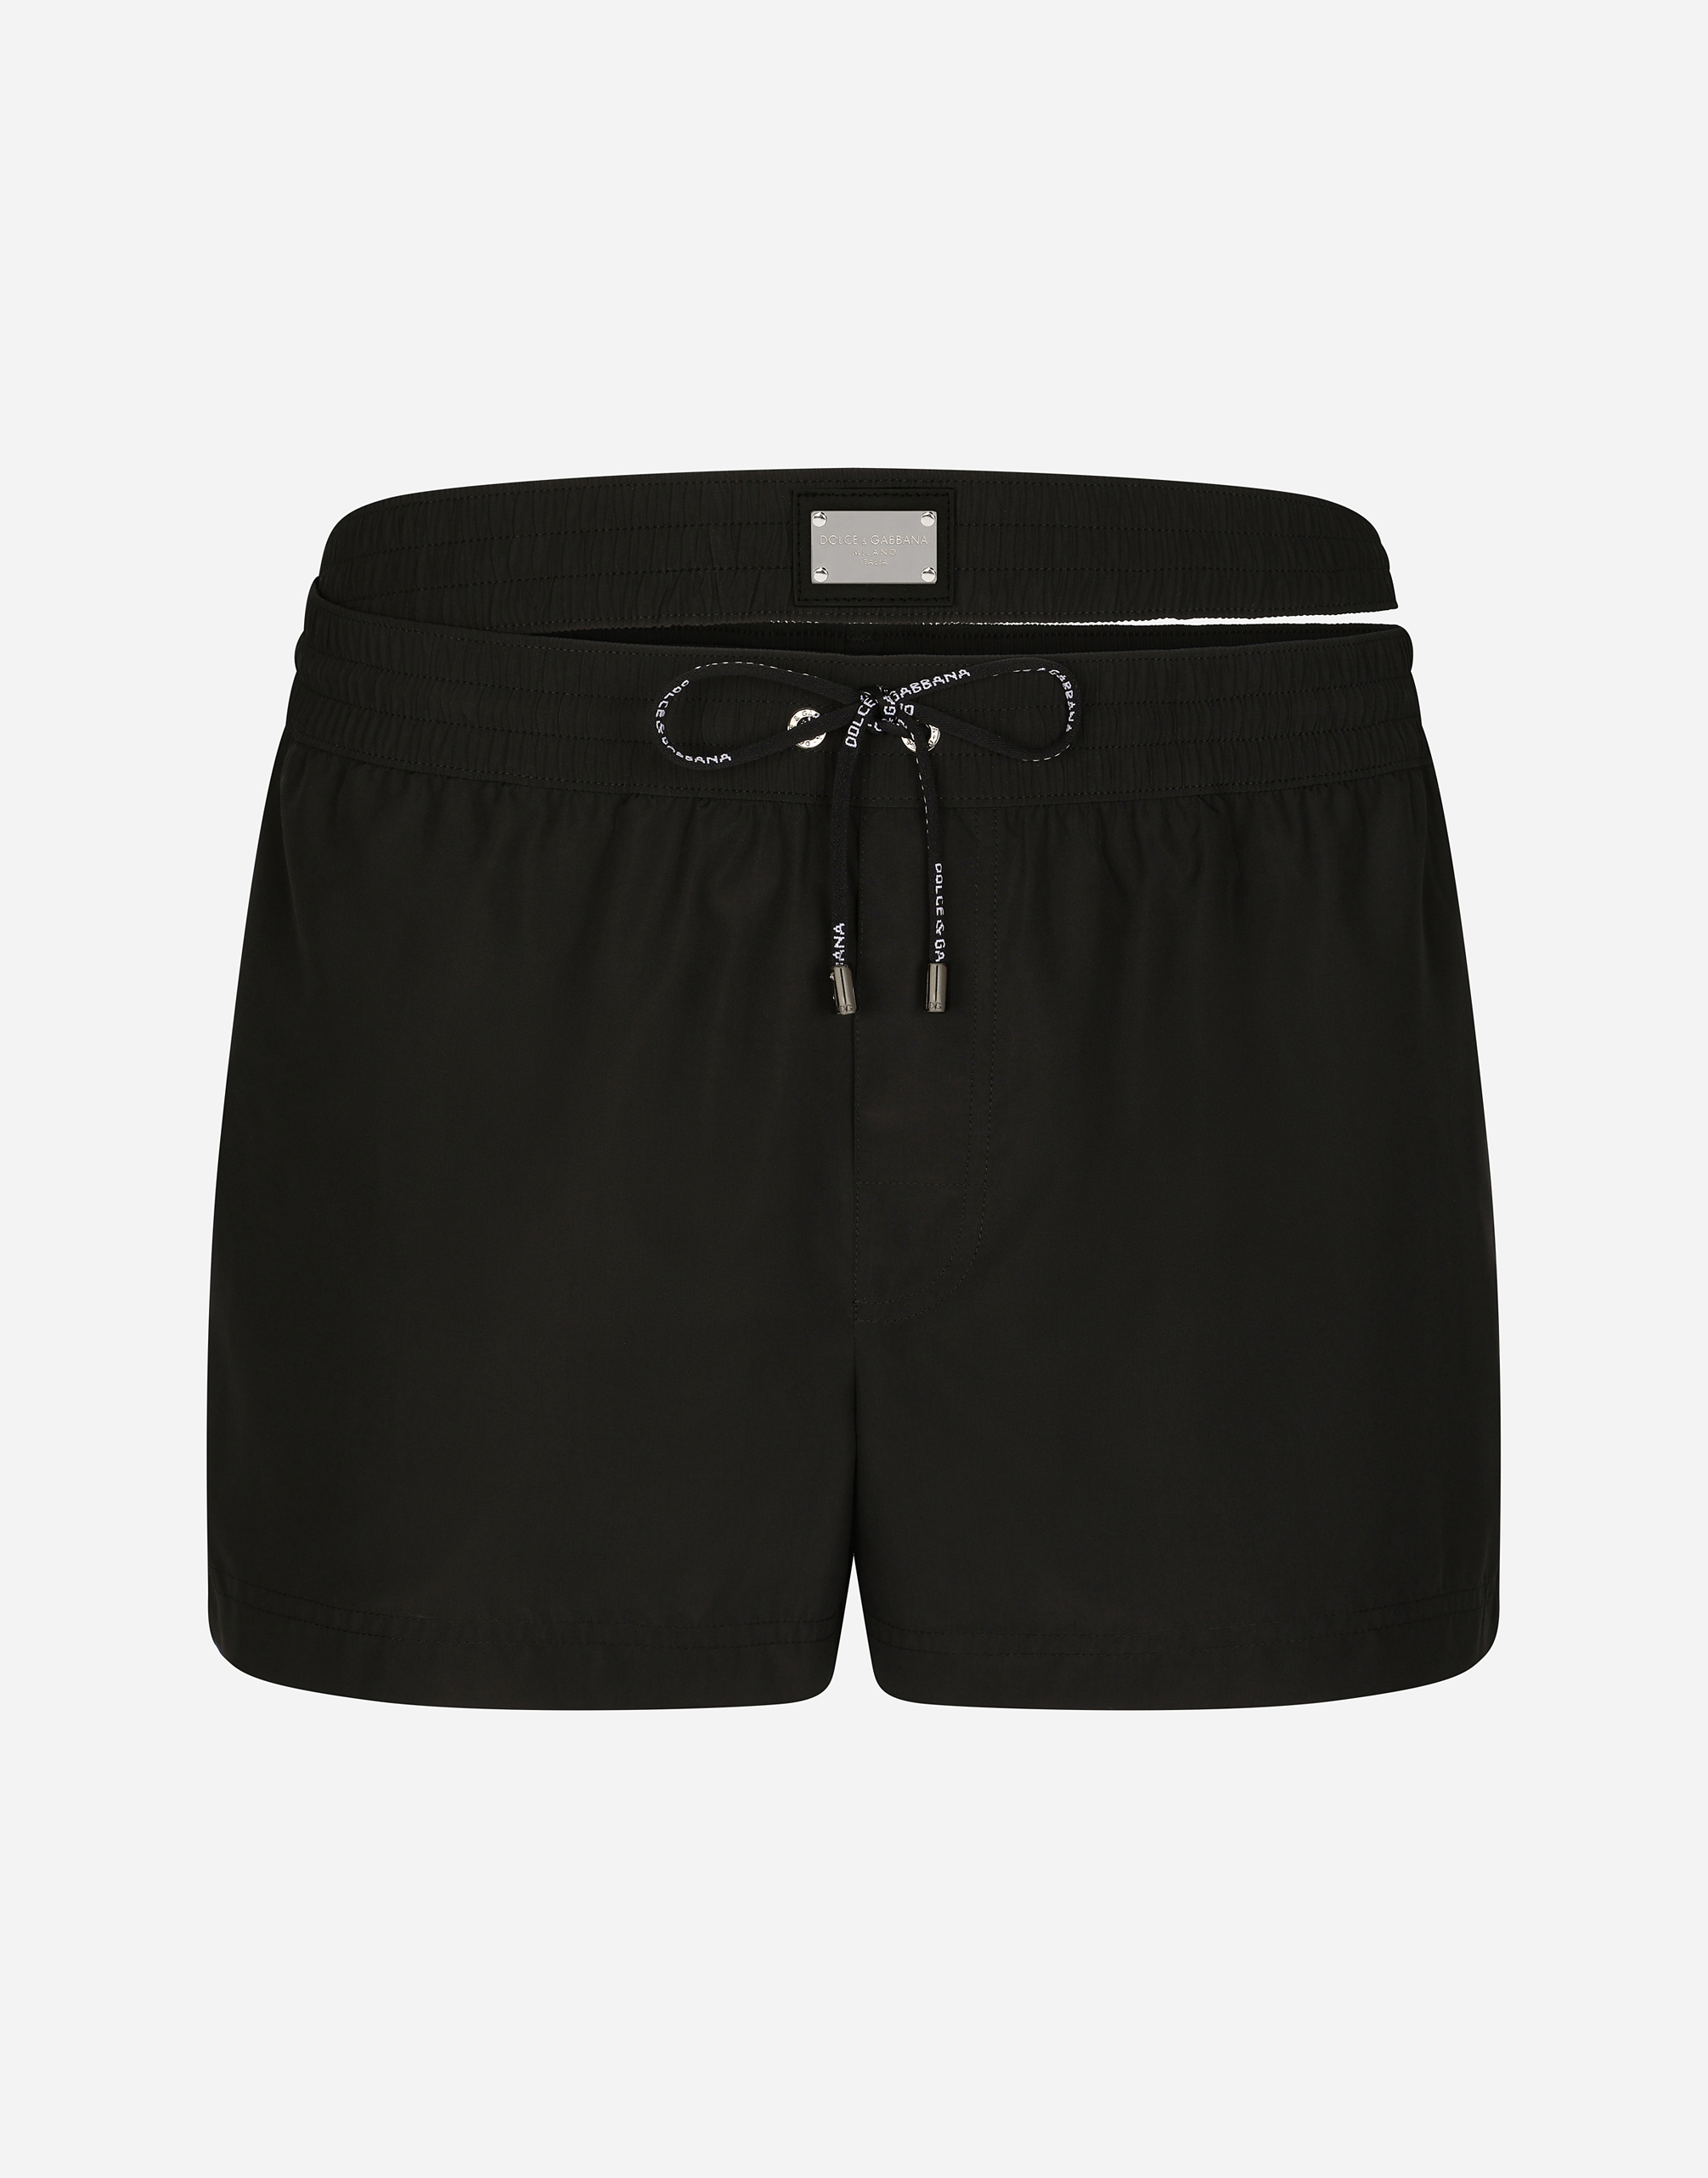 Short swim trunks with double waistband and branded tag in Black